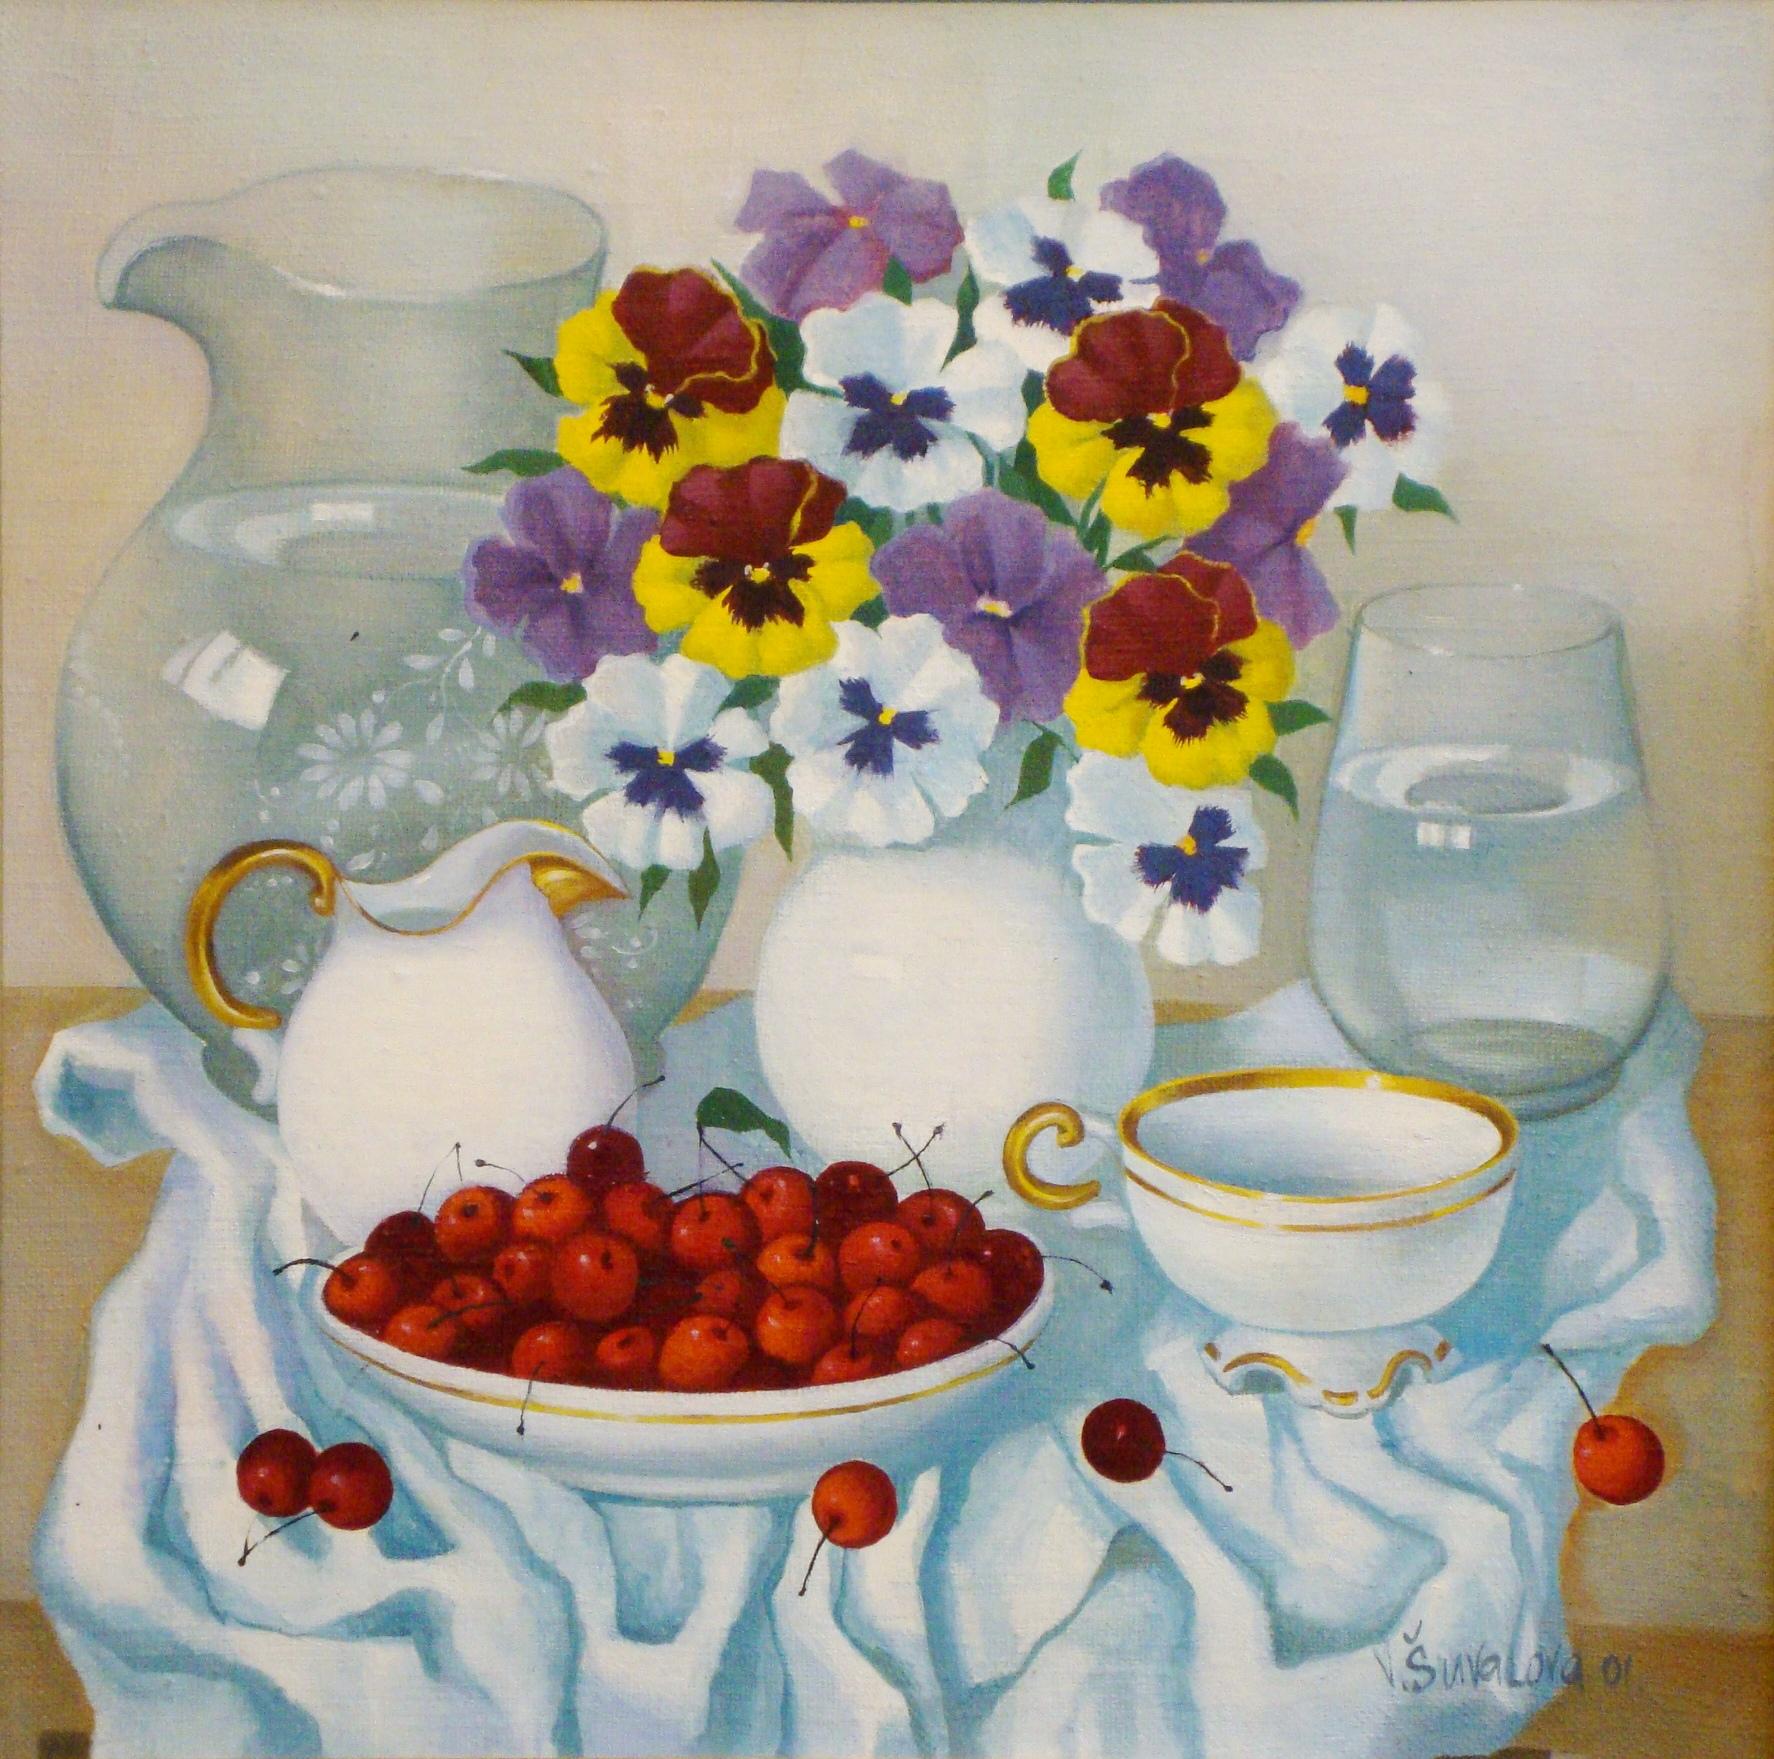 Still life with cherries. 2001, canvas, oil, 50x50.5 cm